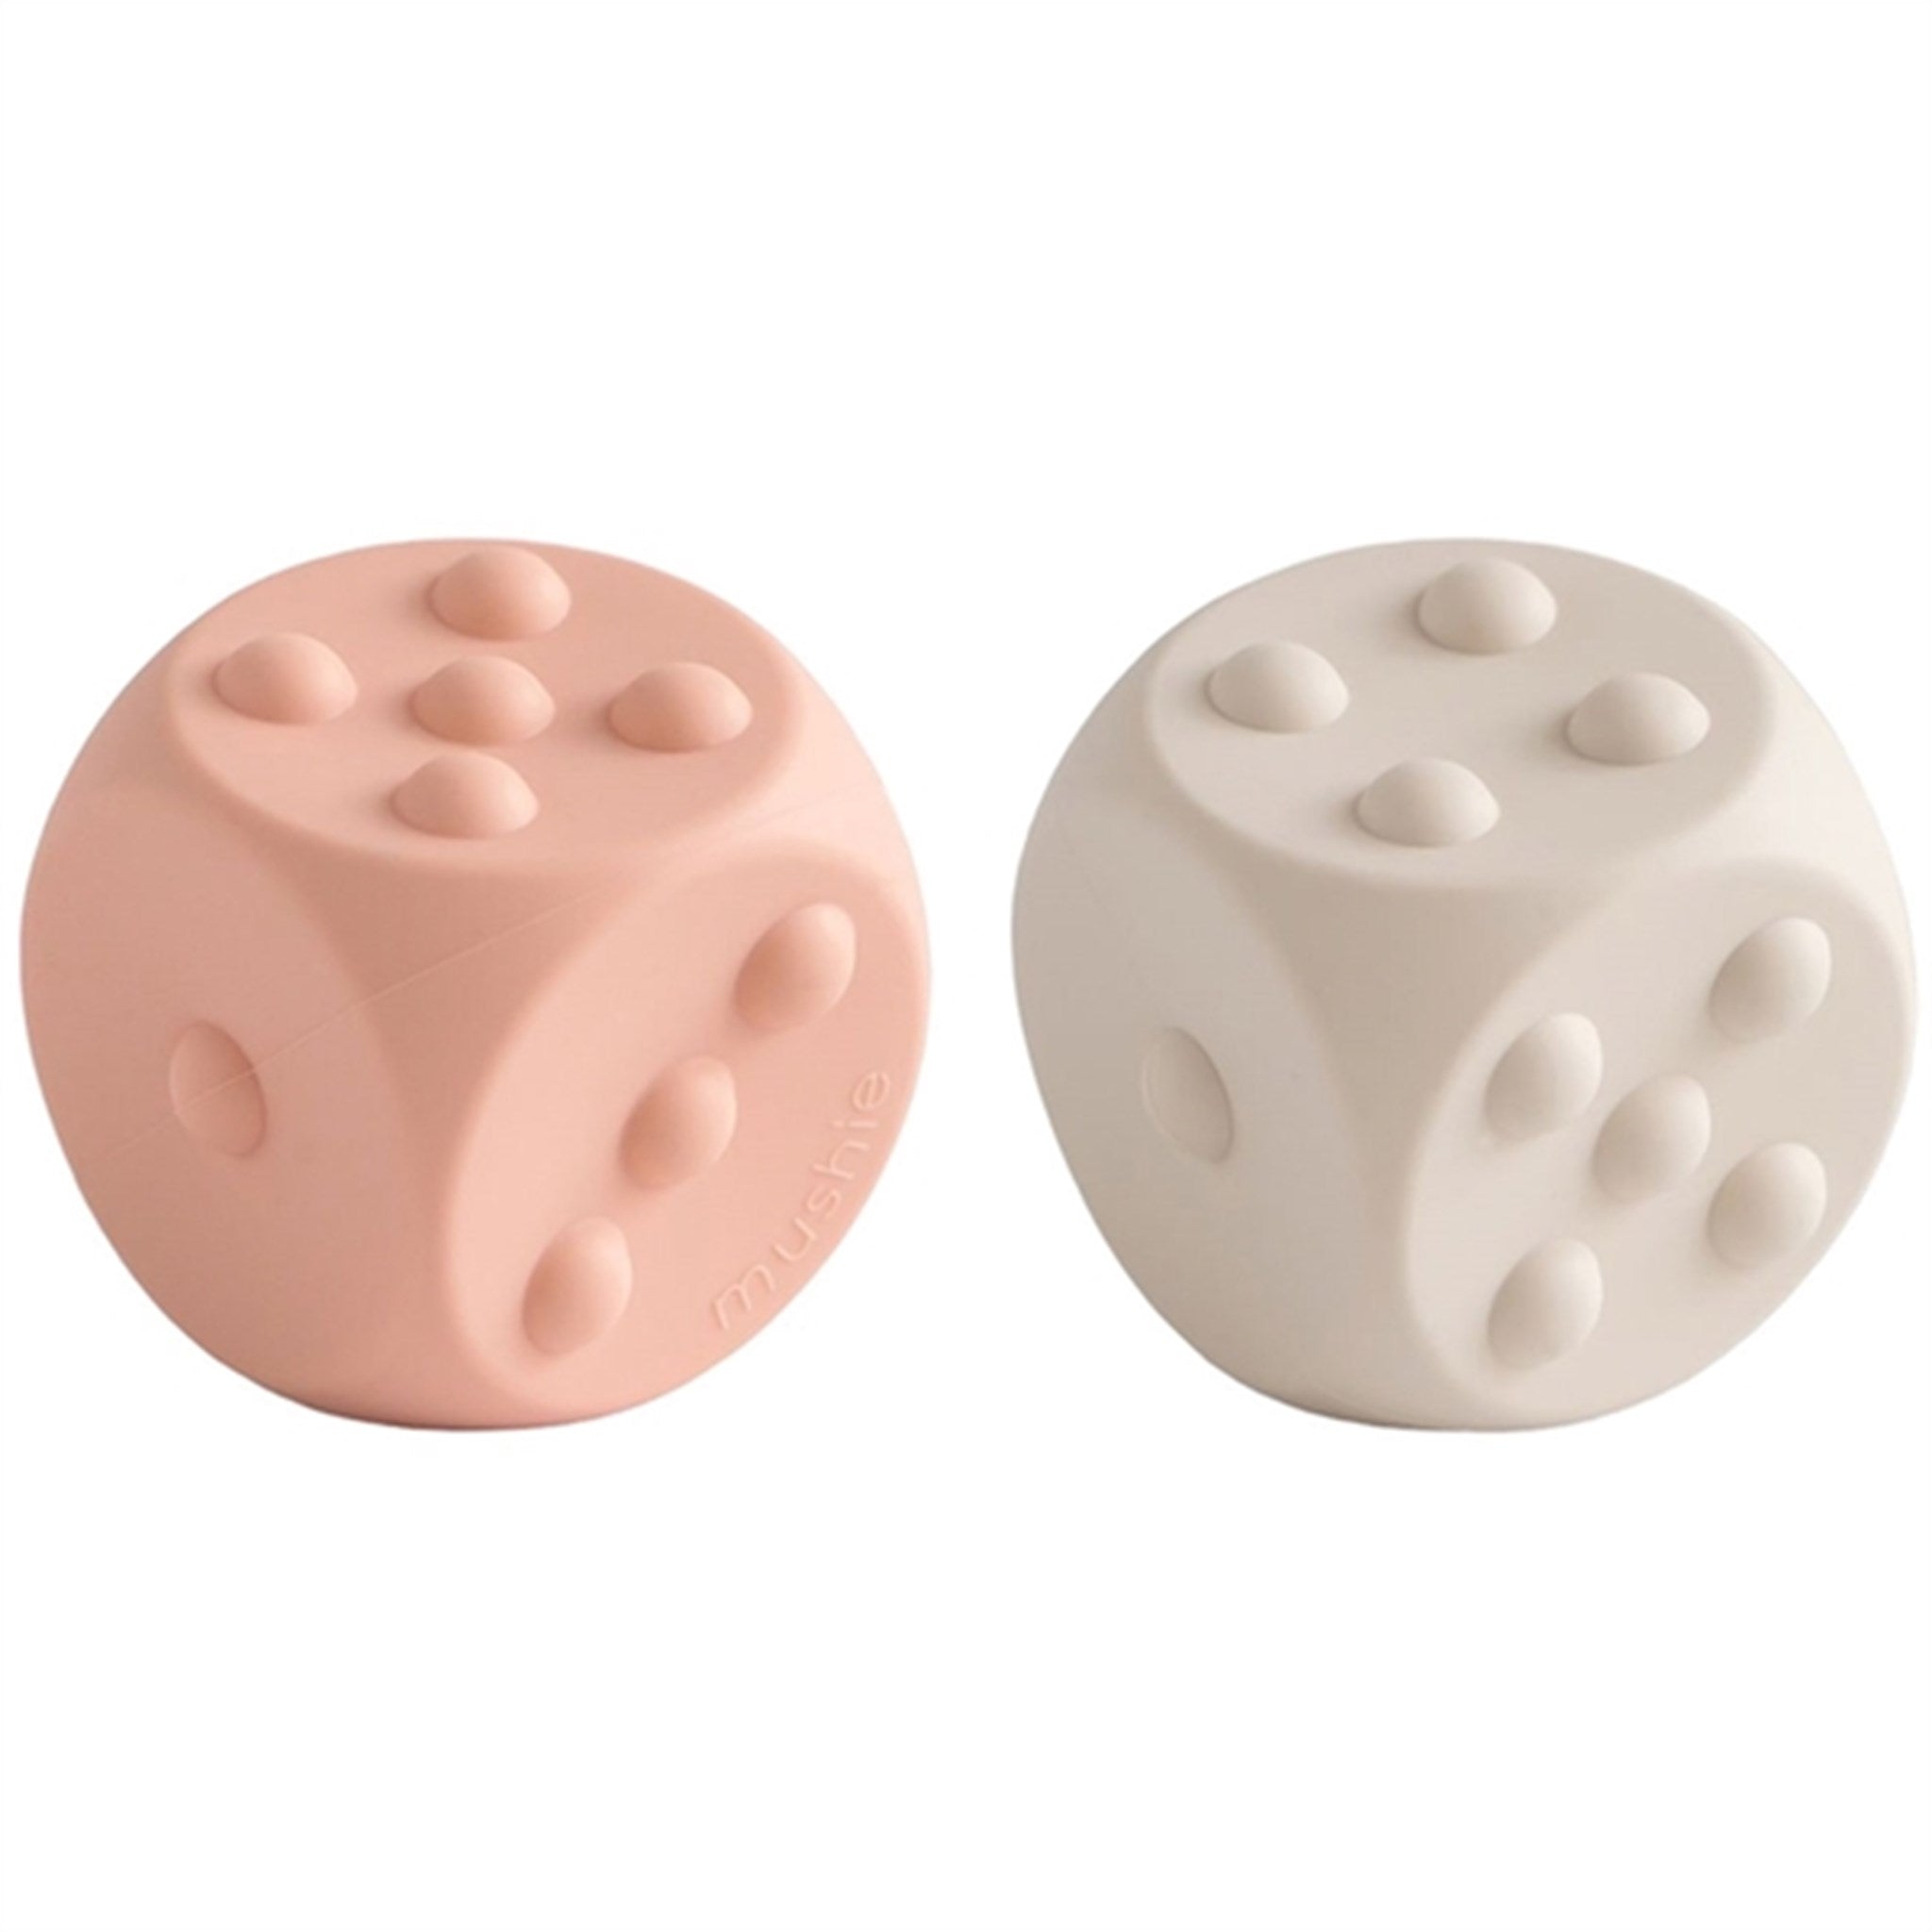 Mushie Silicone Dice Press Toy  2-pack Blush/Shifting Sands